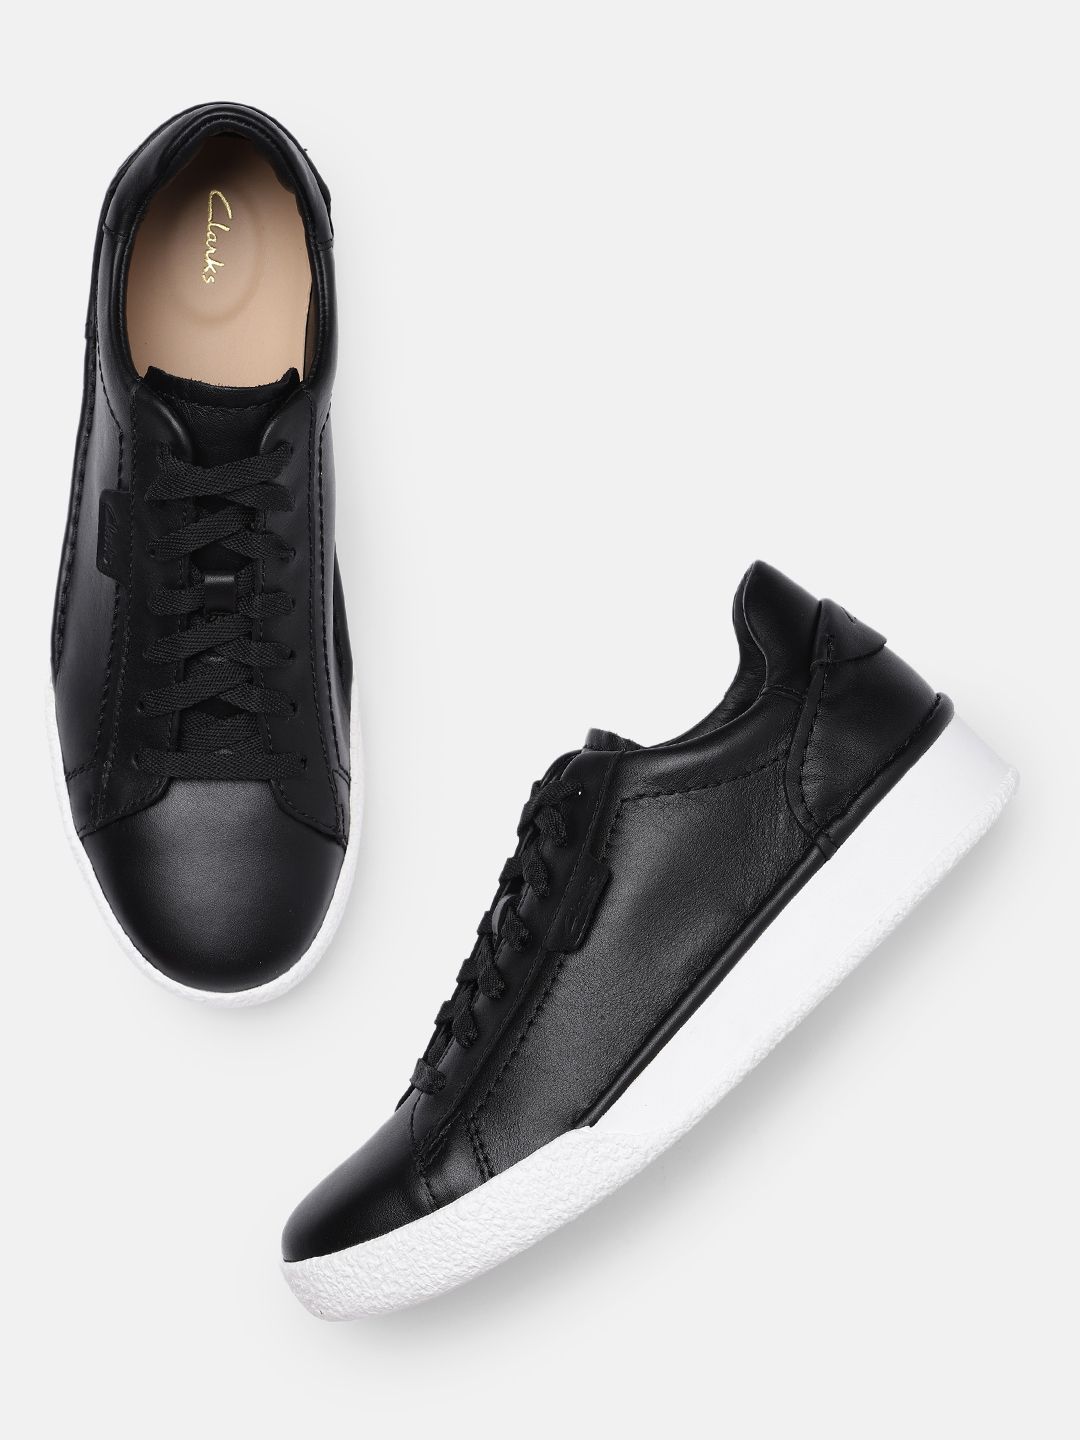 Clarks Women Black Solid Leather Sneakers Price in India